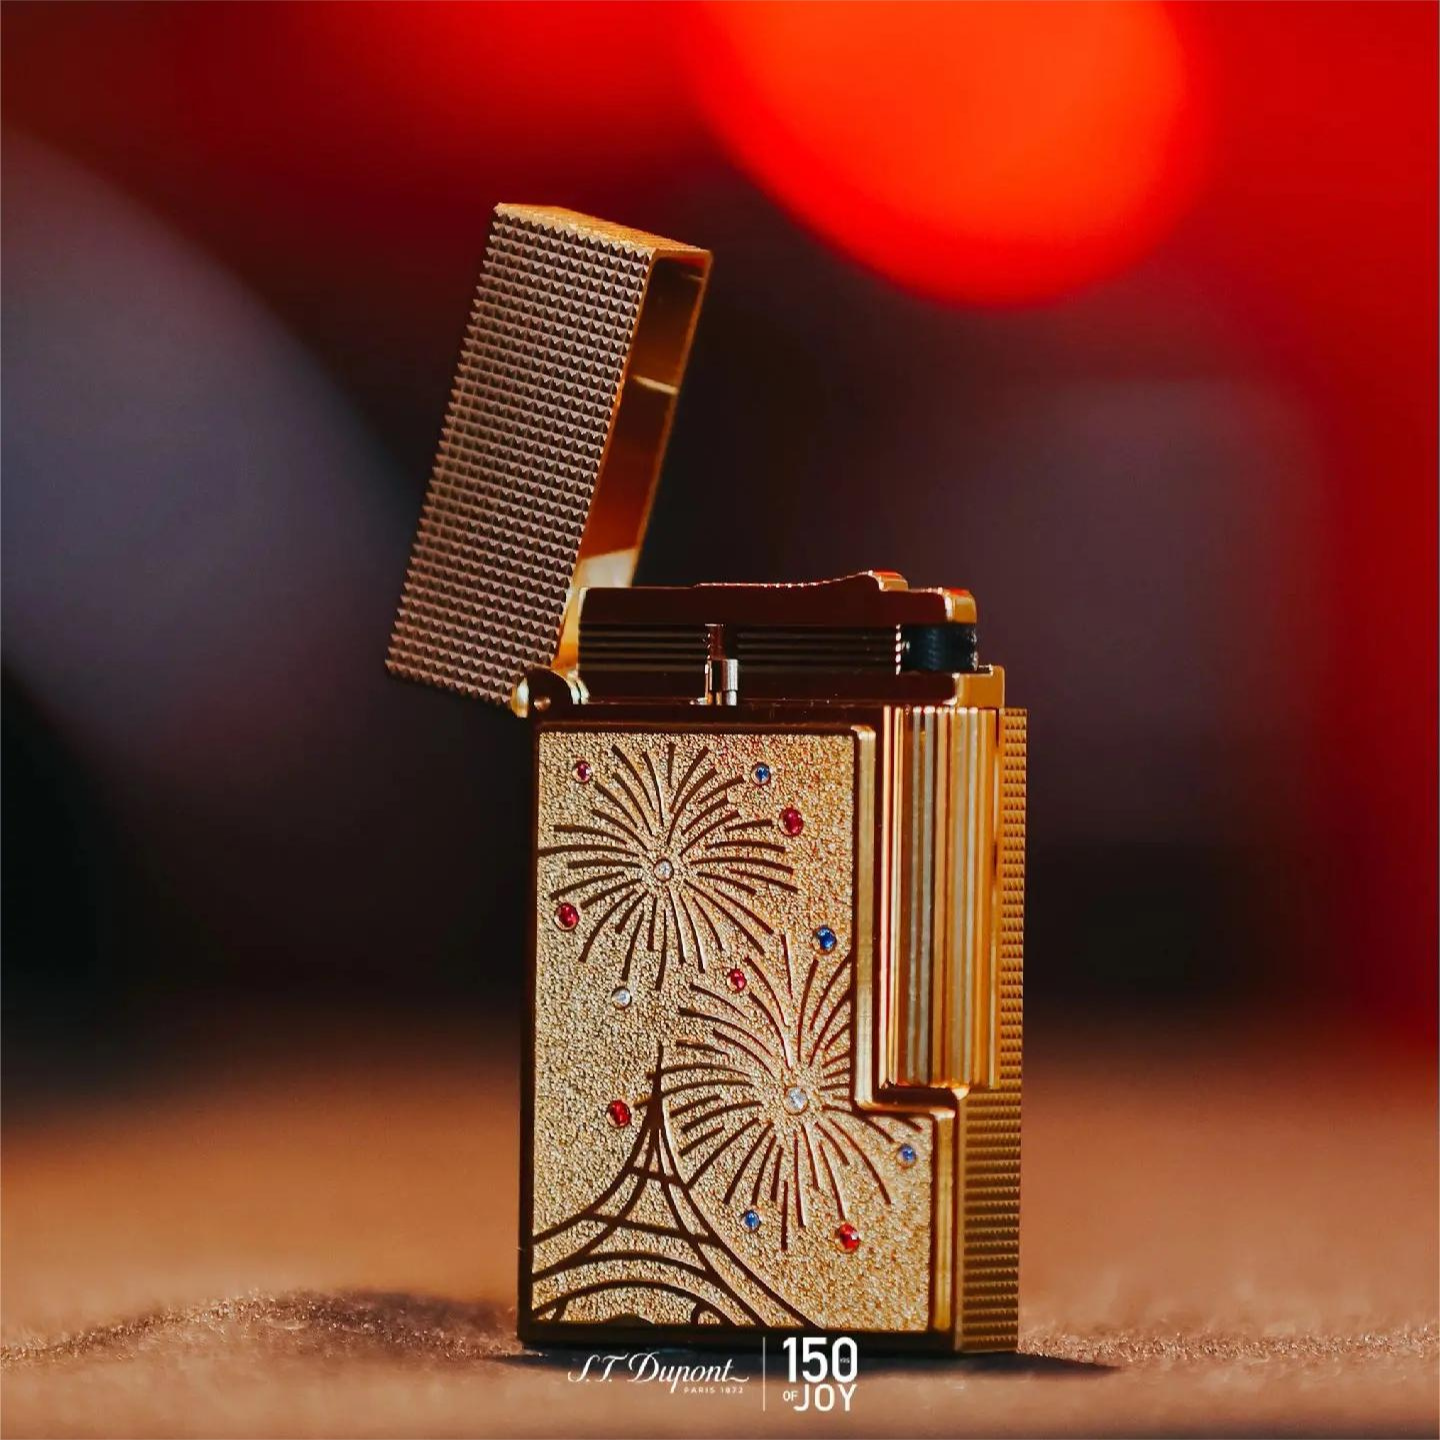 S.T. Dupont Ligne 2 Firework Jewelry Limited Edition Lighter5